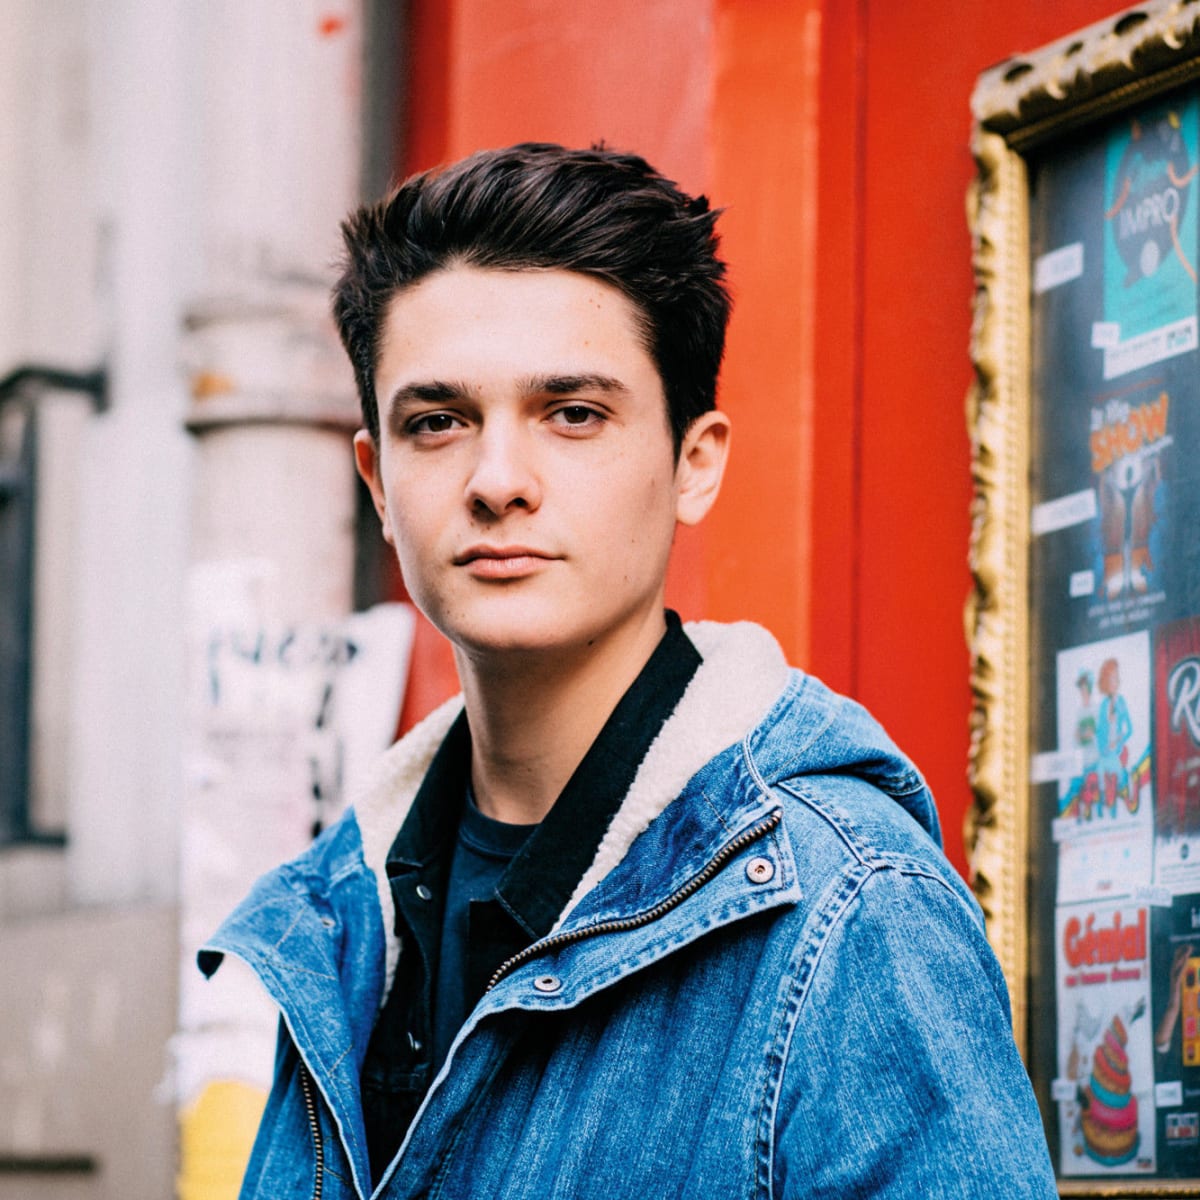 Kungs Will 'Be Right Here' with GOLDN For Their New Track and Summer Anthem  -  - The Latest Electronic Dance Music News, Reviews & Artists